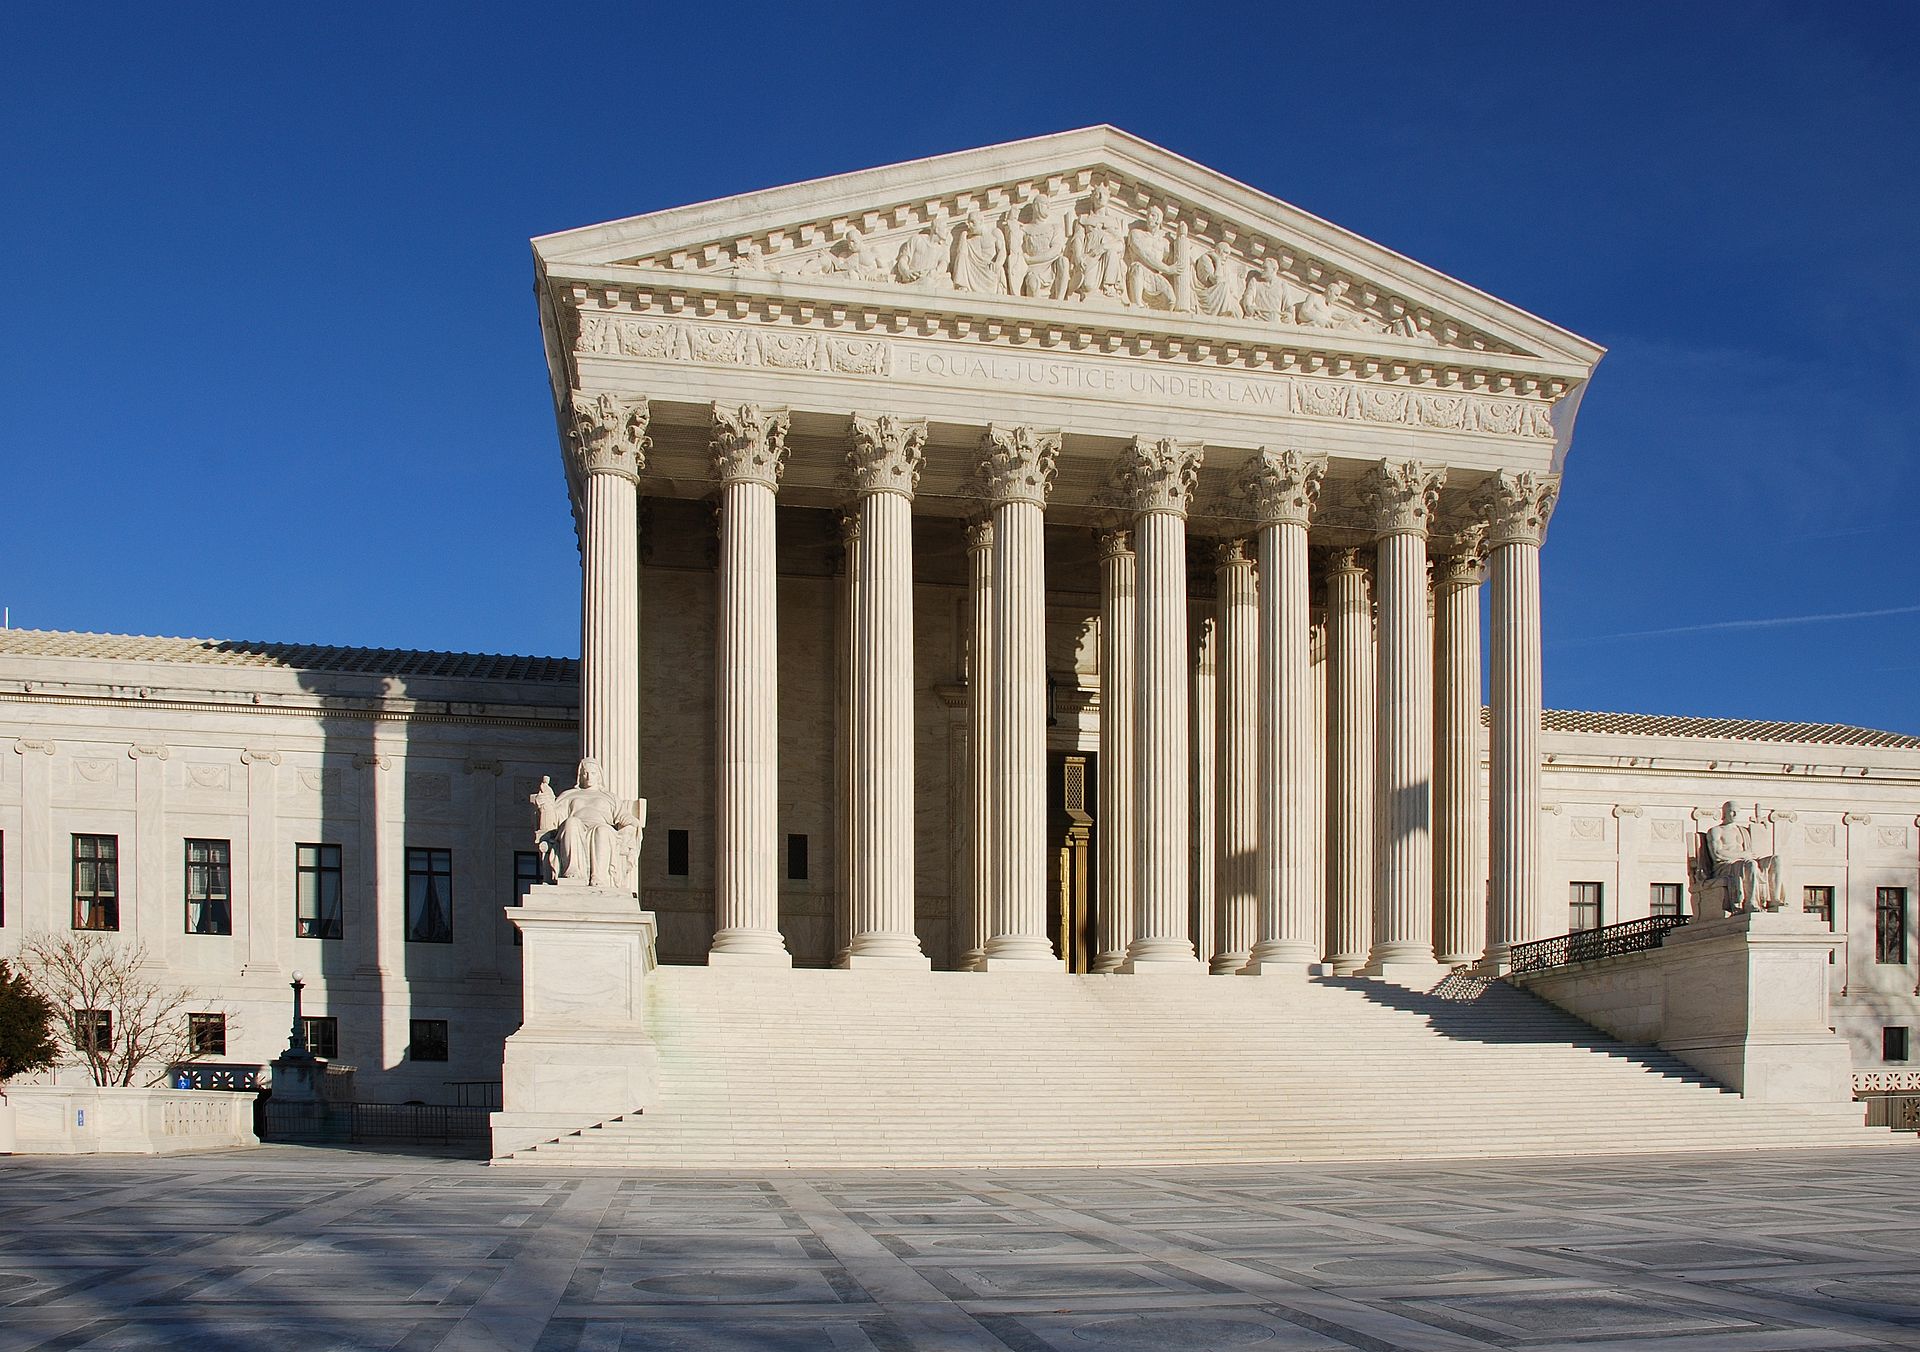 Image of the front of the United States Supreme Court building.